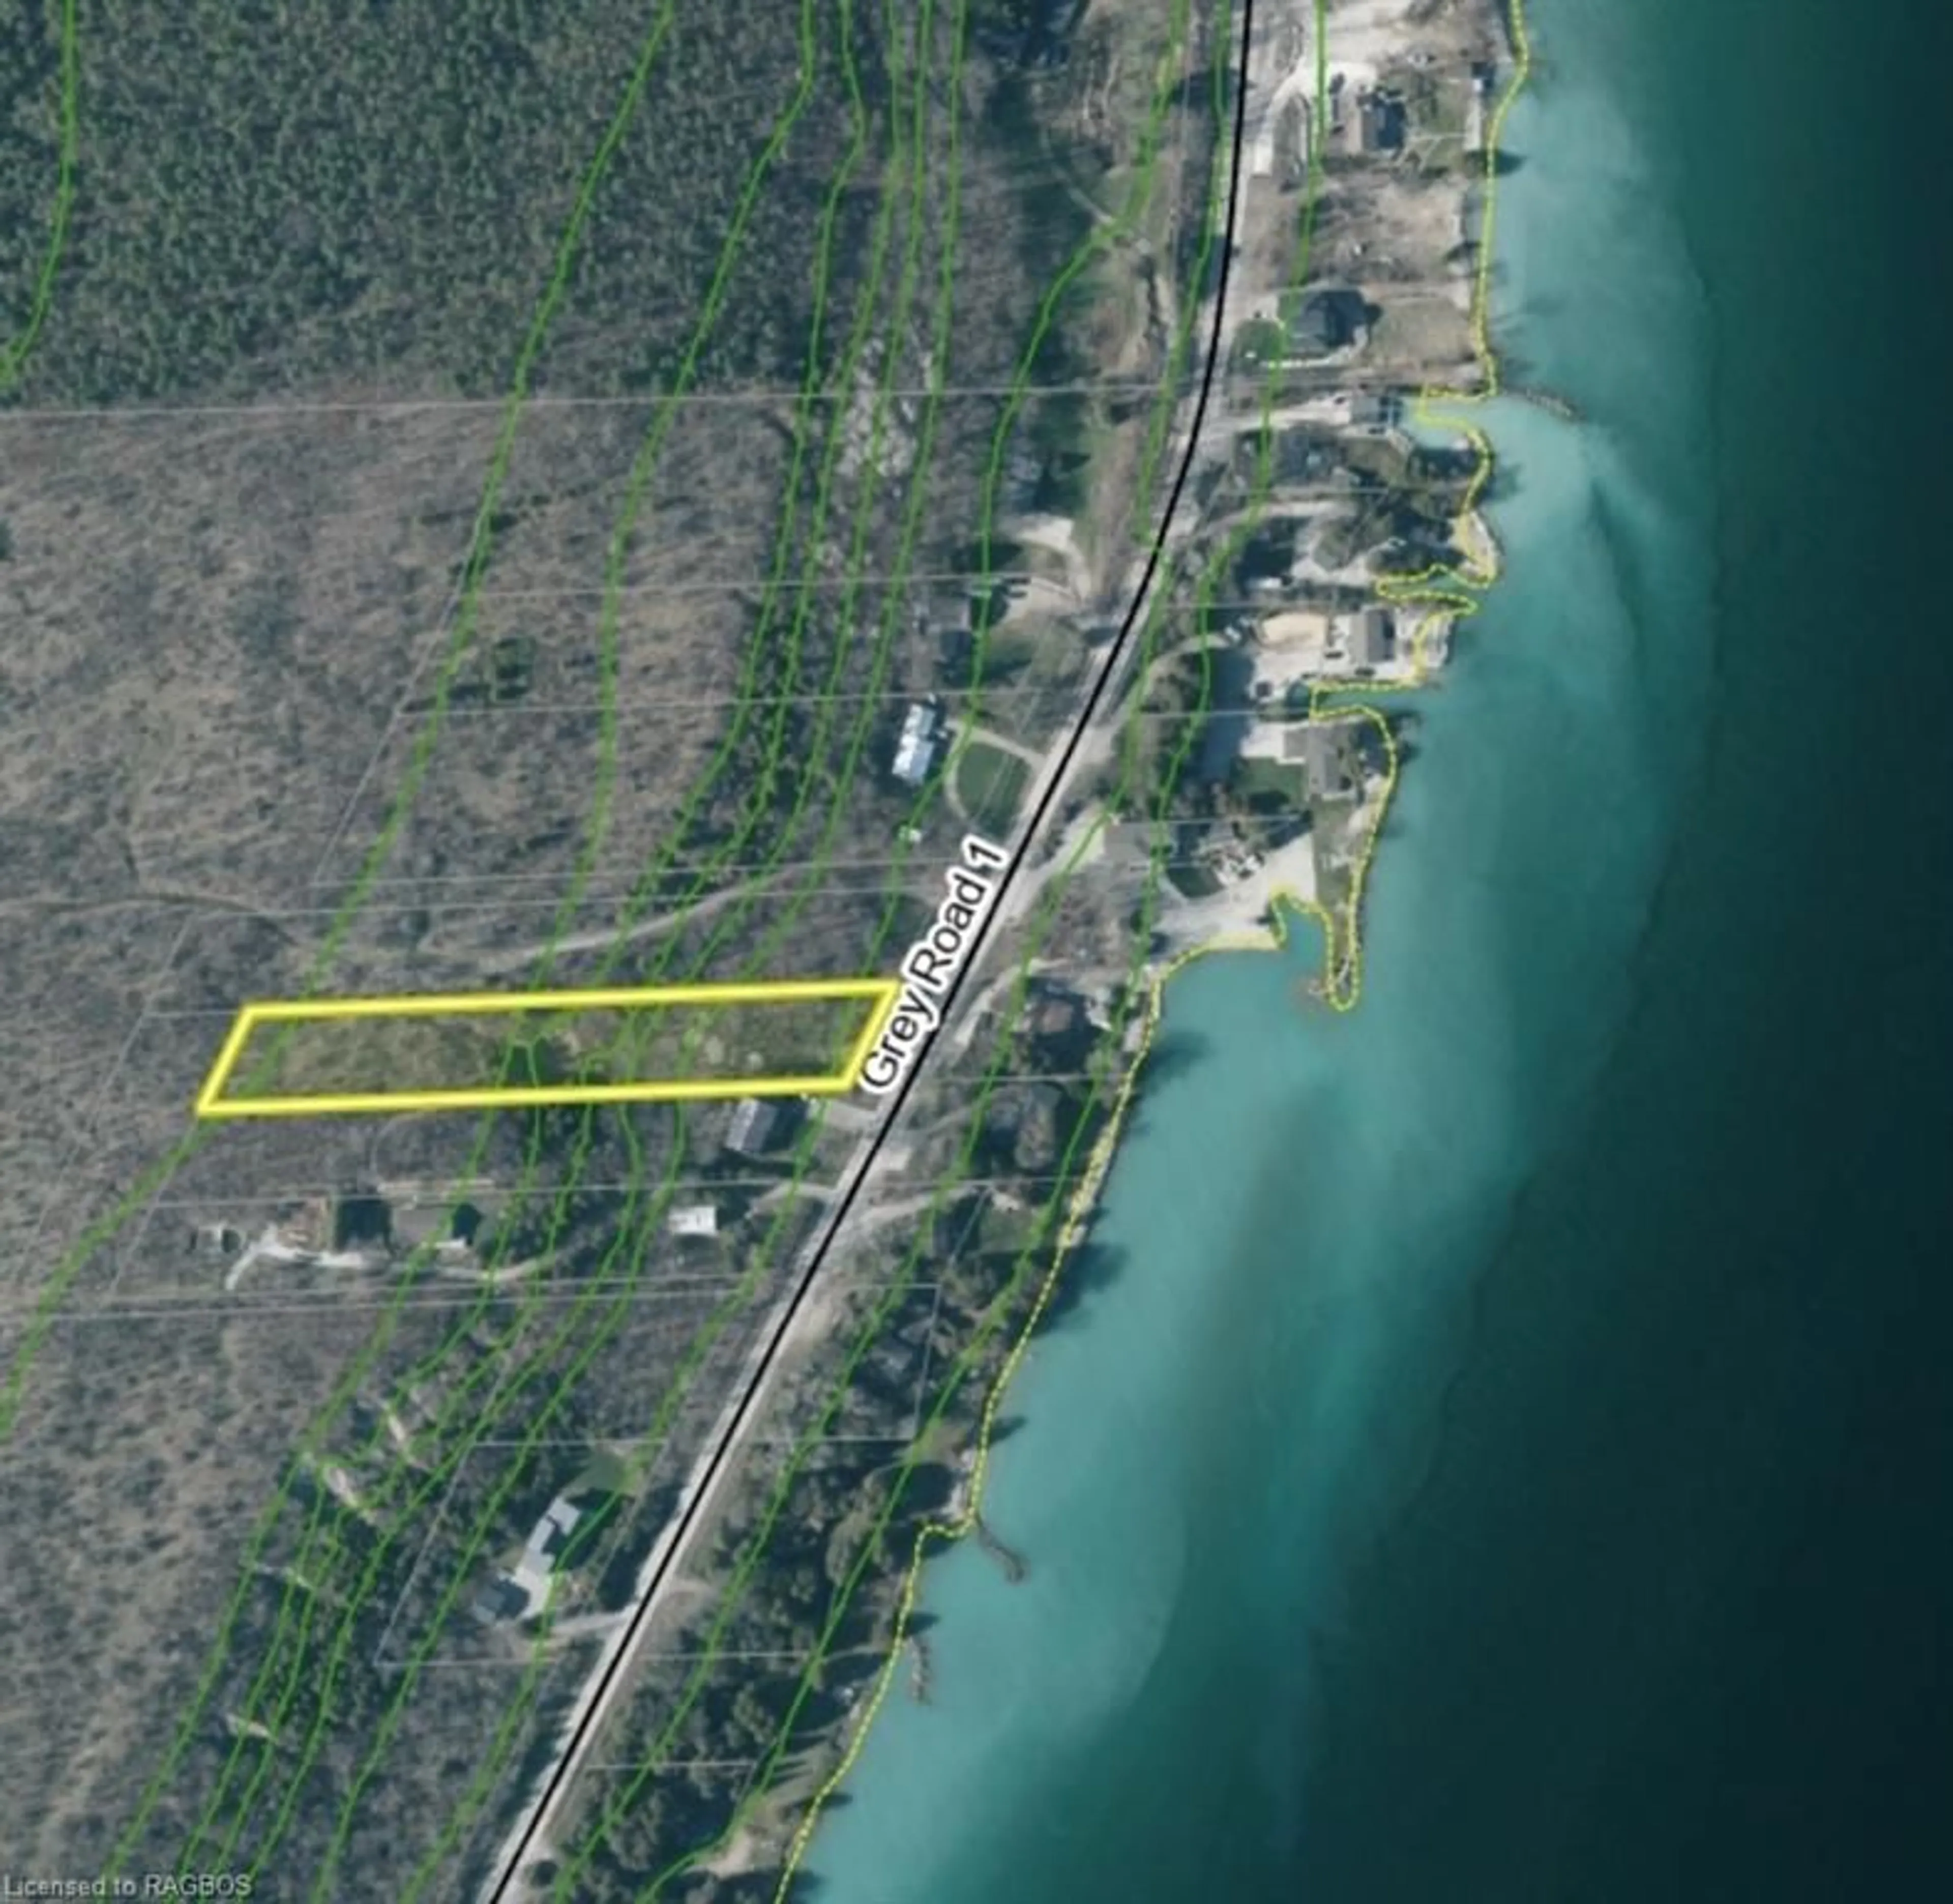 Lakeview for PT LT 14 Grey Road 1, Georgian Bluffs Ontario N0H 1S0